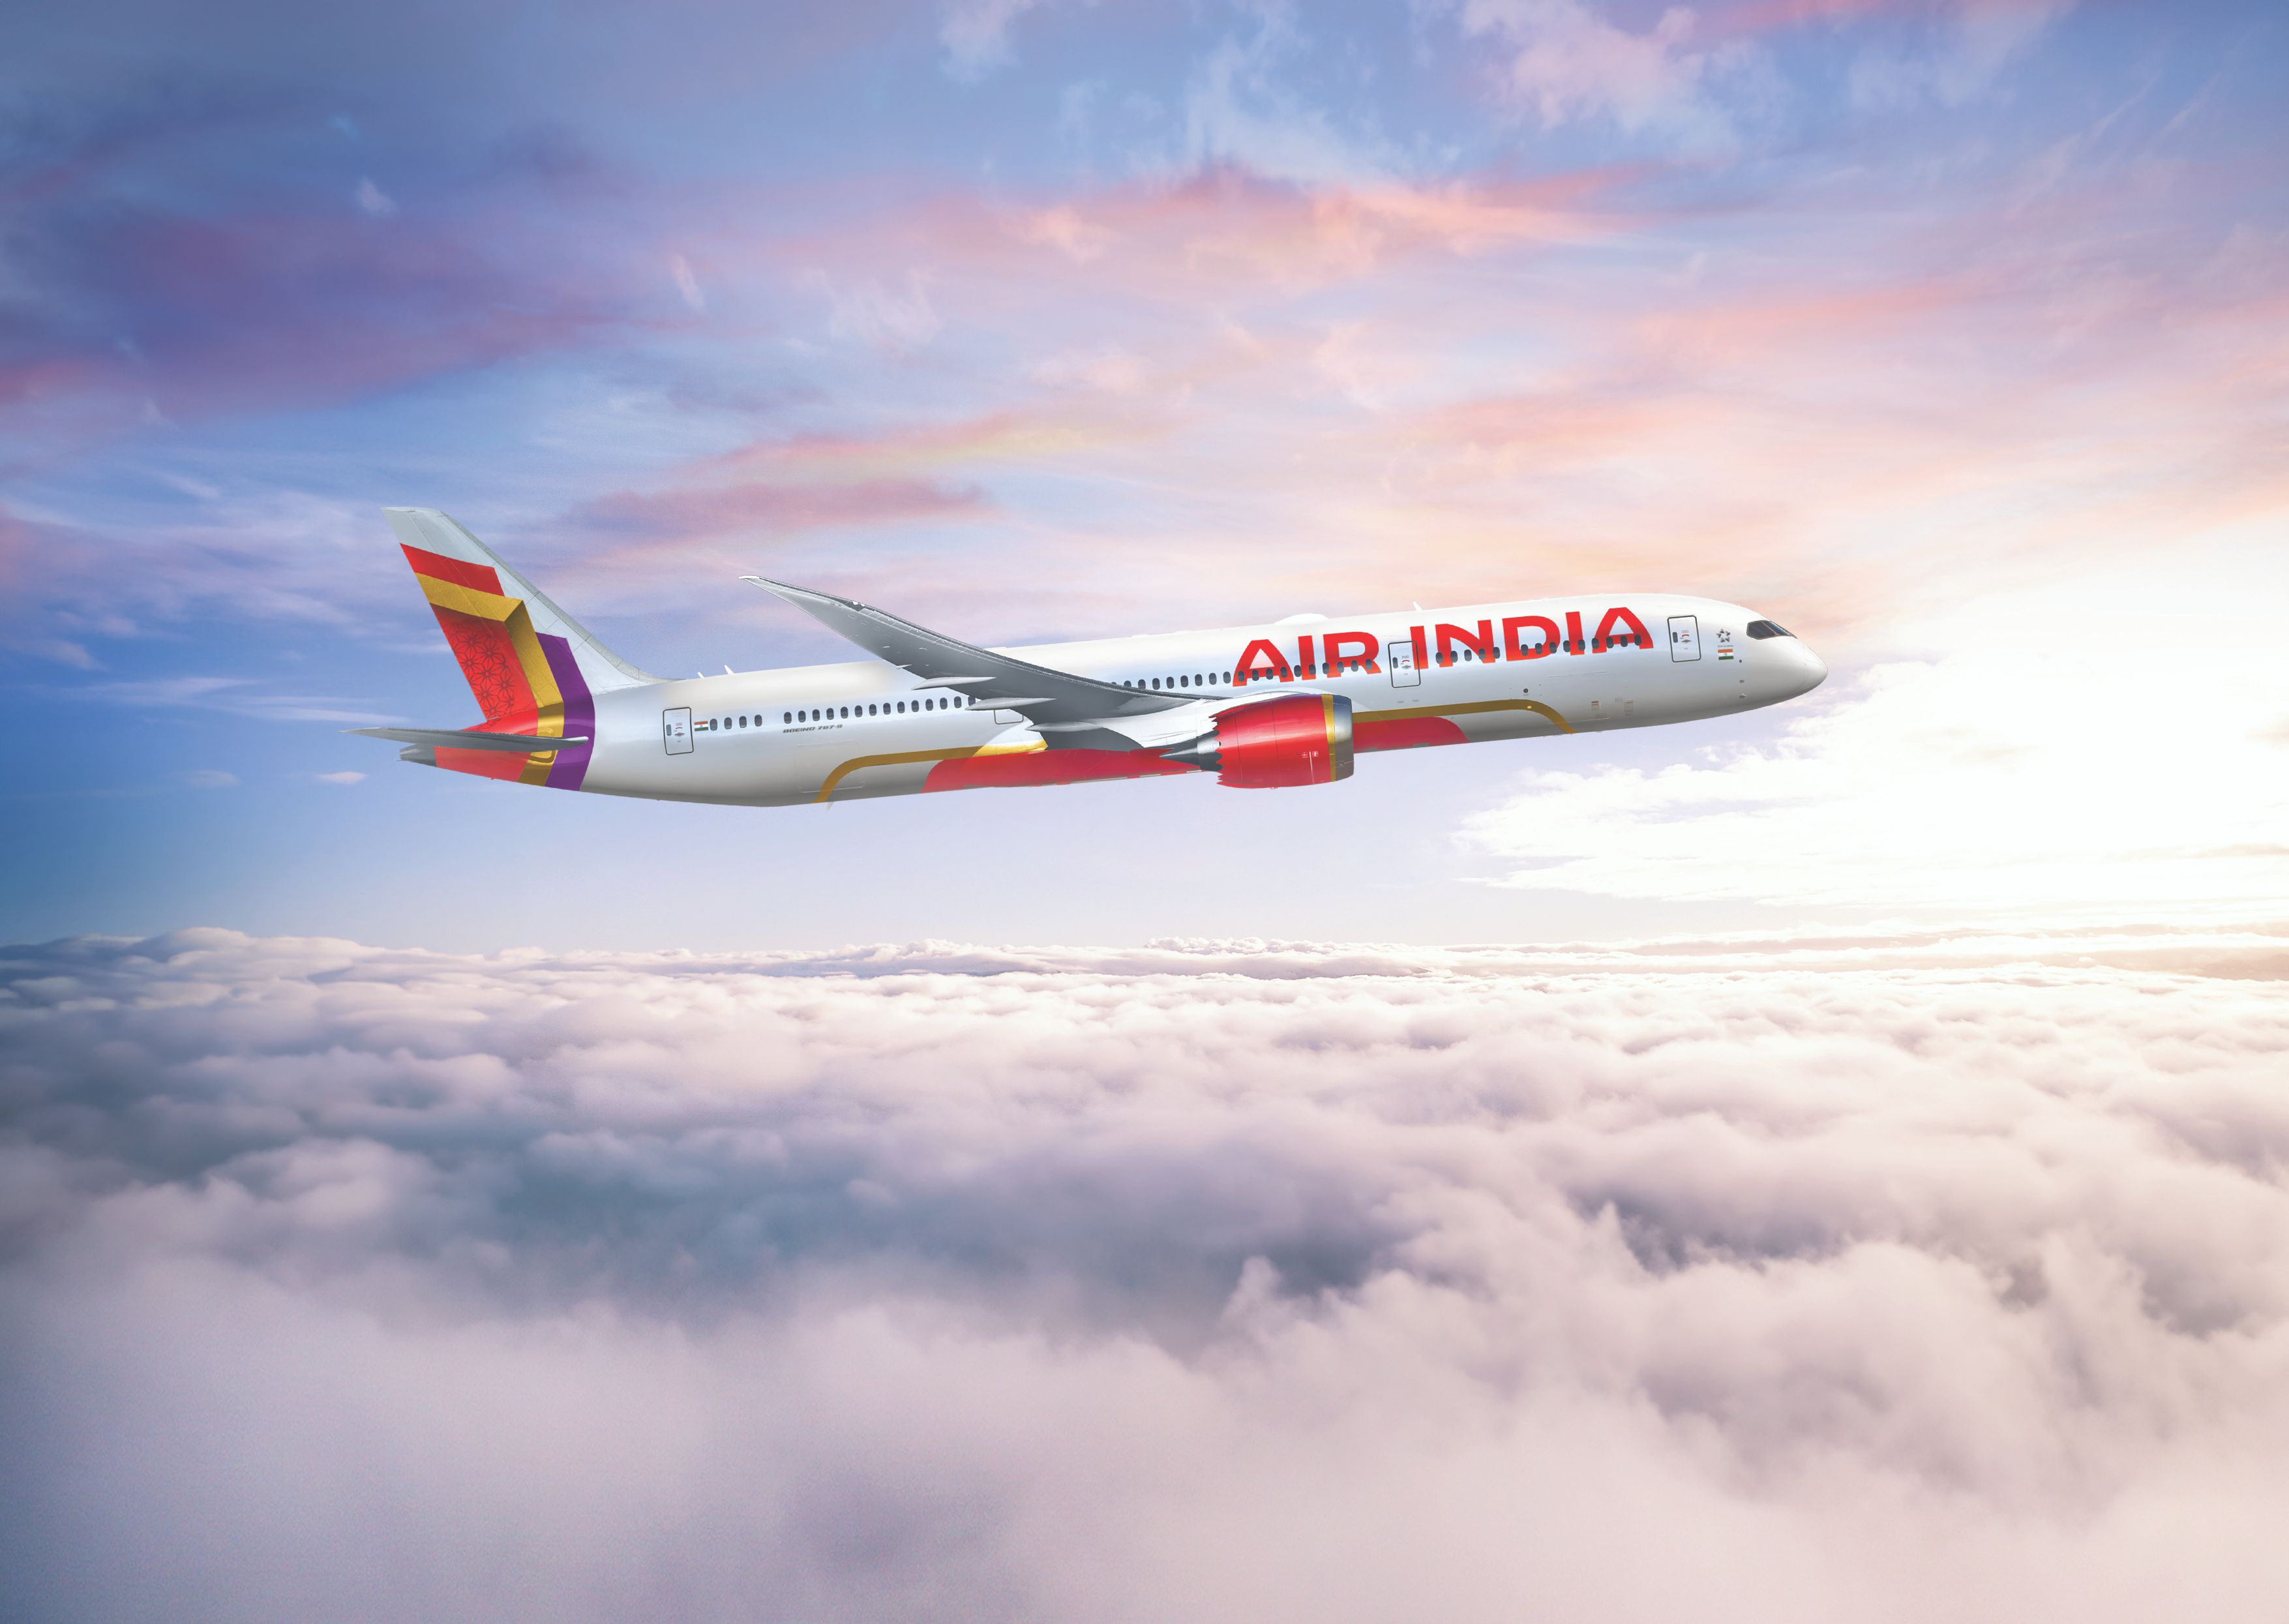 An Air India 787 in its New Livery flying above the clouds.